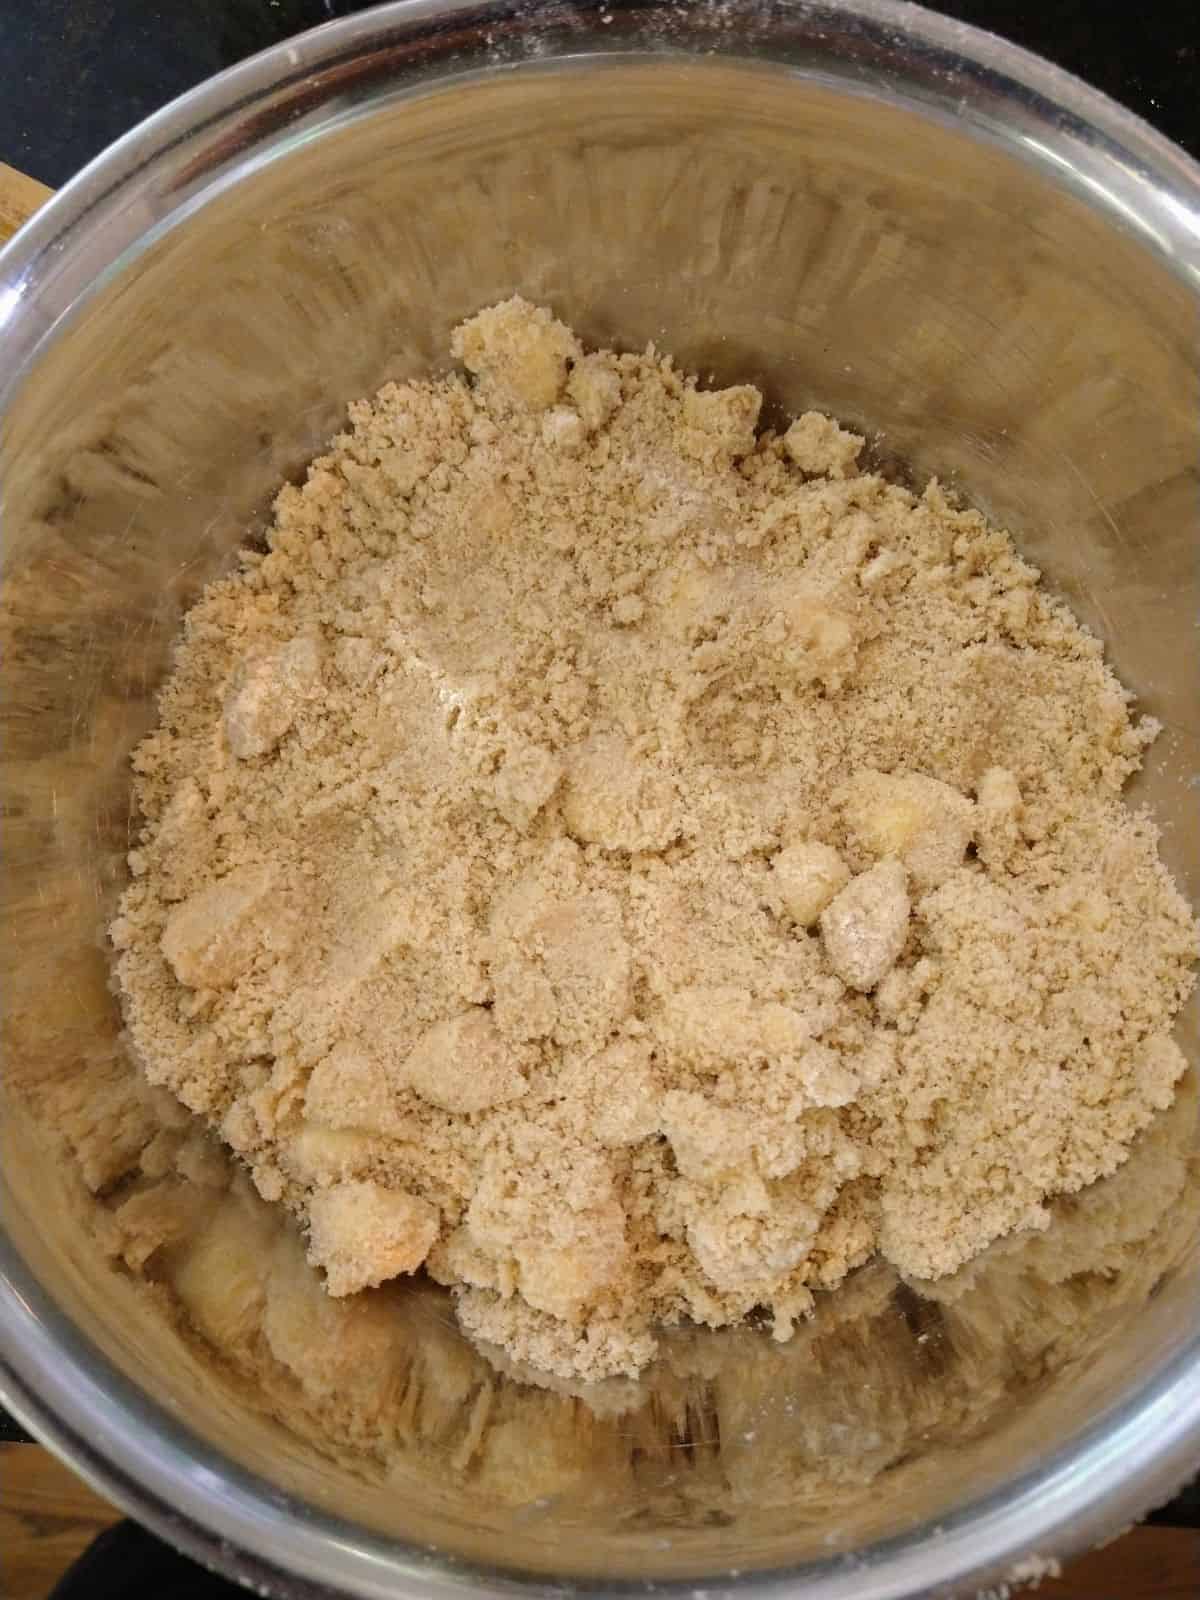 A brown sugar, flour, and butter crumble topping inside a large metal mixing bowl.